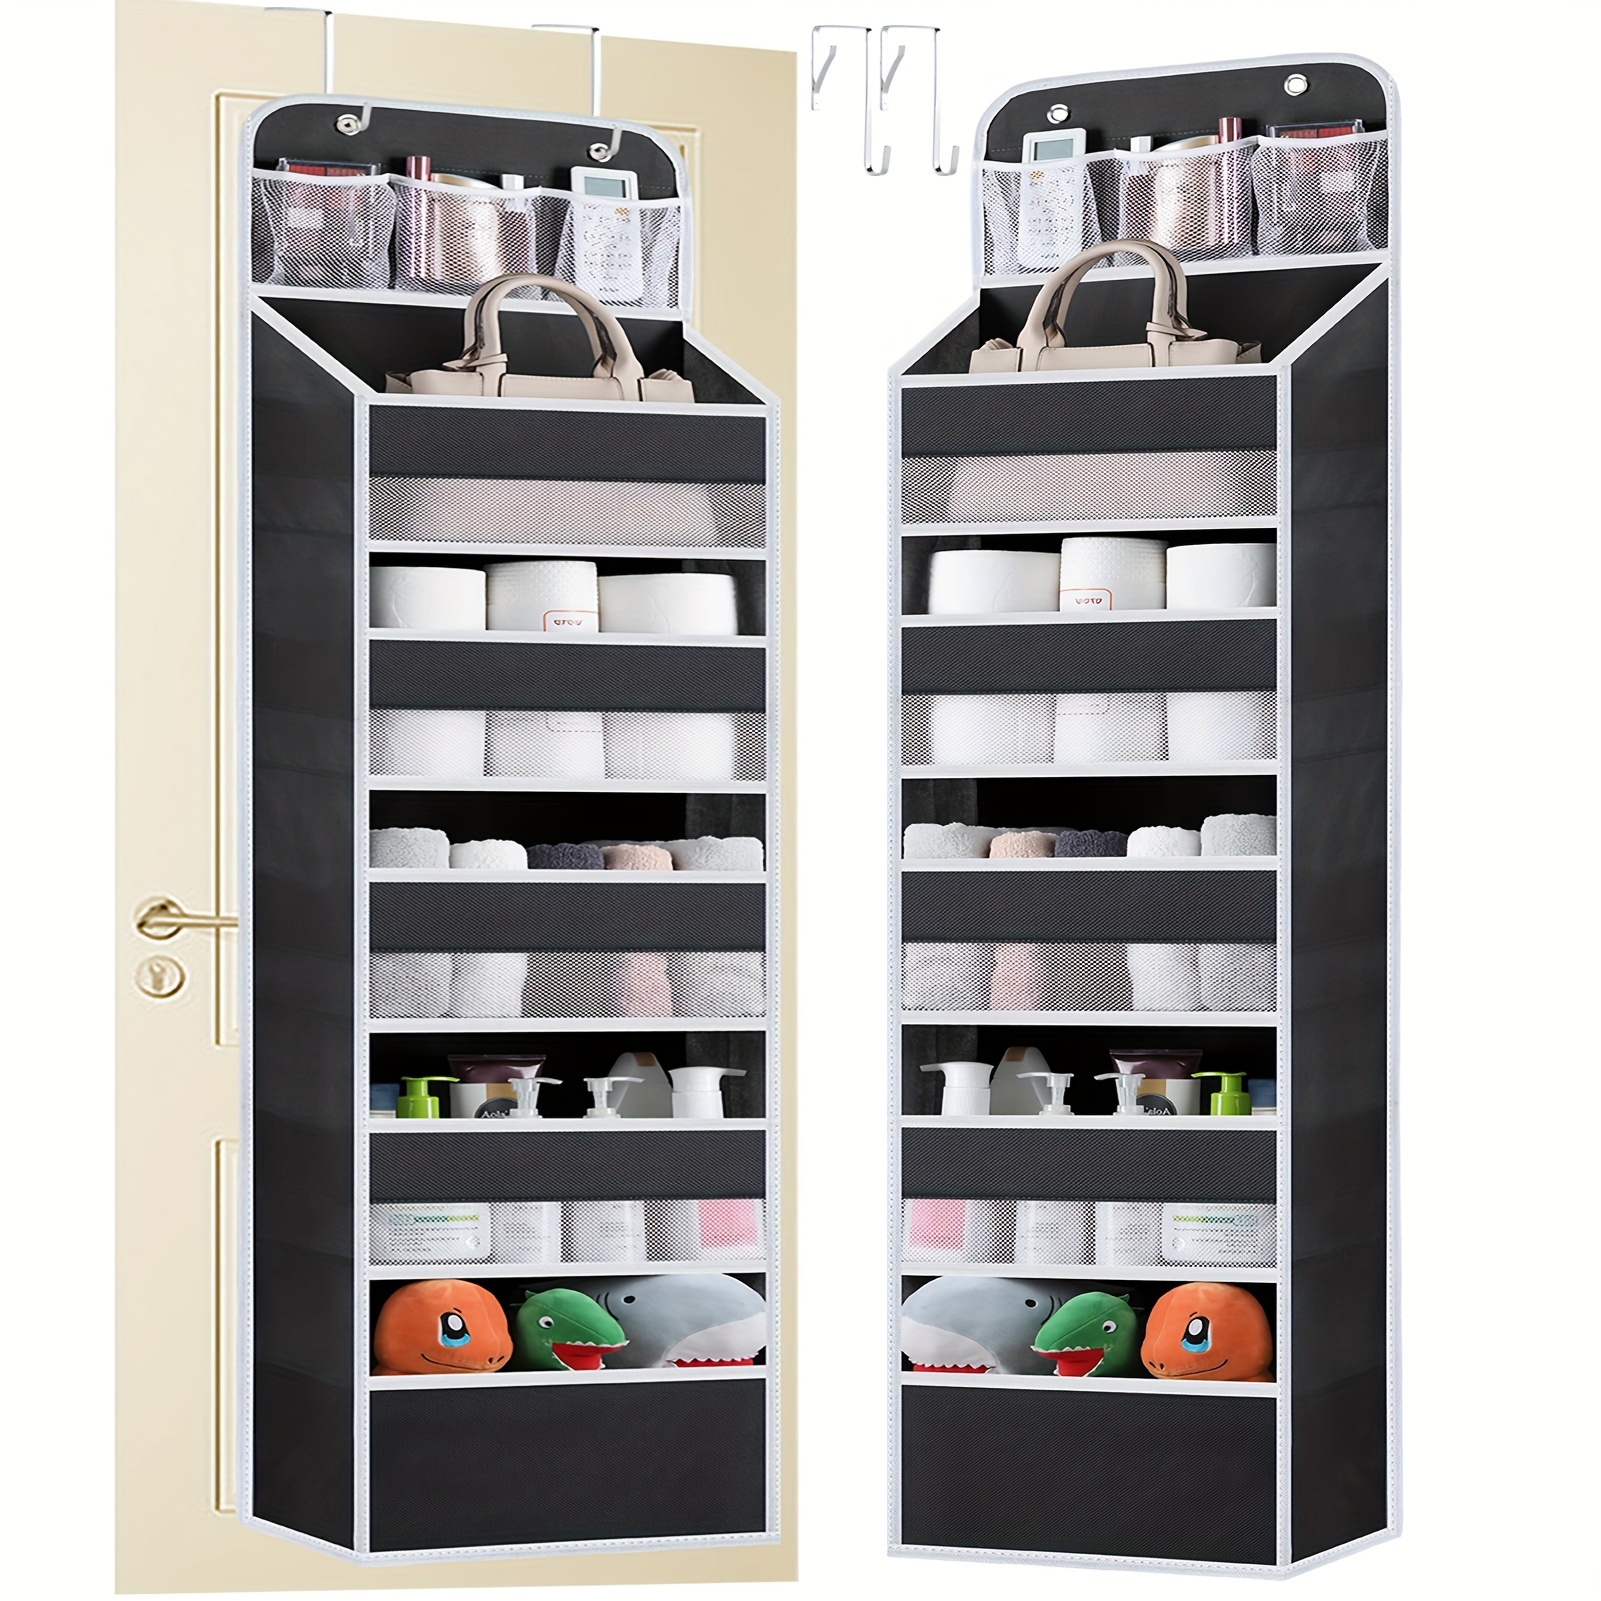 

6-shelf Over The Door Organizer - Hanging Storage With 8 Large Capacity Pockets For Pantry, Nursery, Bathroom, Bedroom, Kitchen, Dorm, And Camper, Black